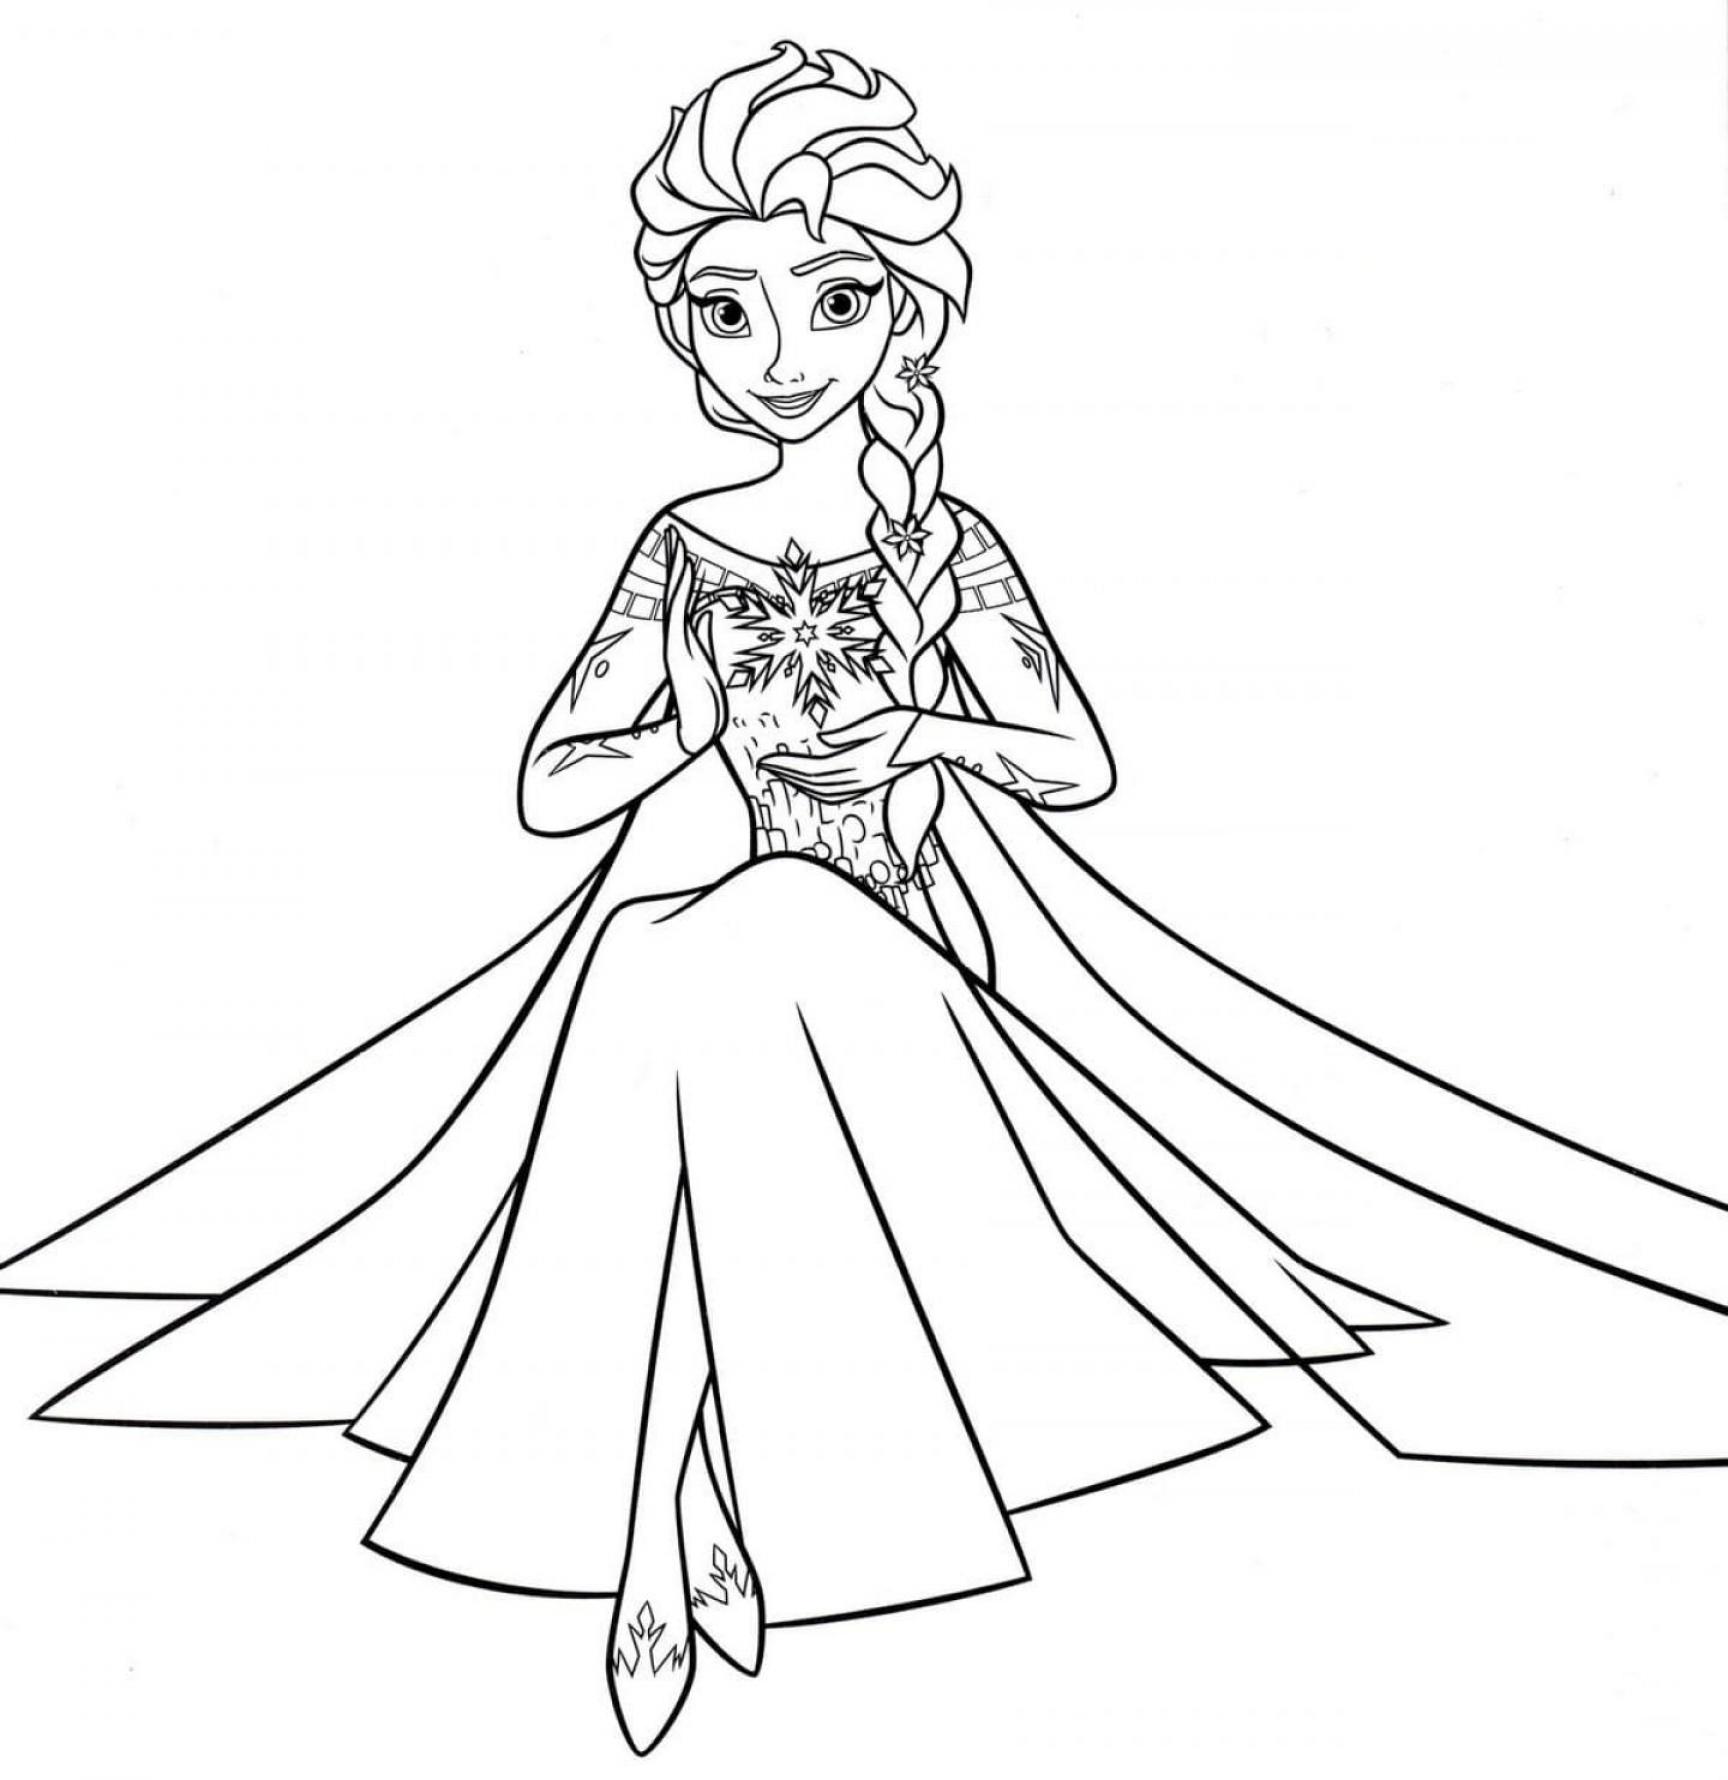 Elsa Coloring Pages | Best Coloring Pages for Girls - SheetalColor.com